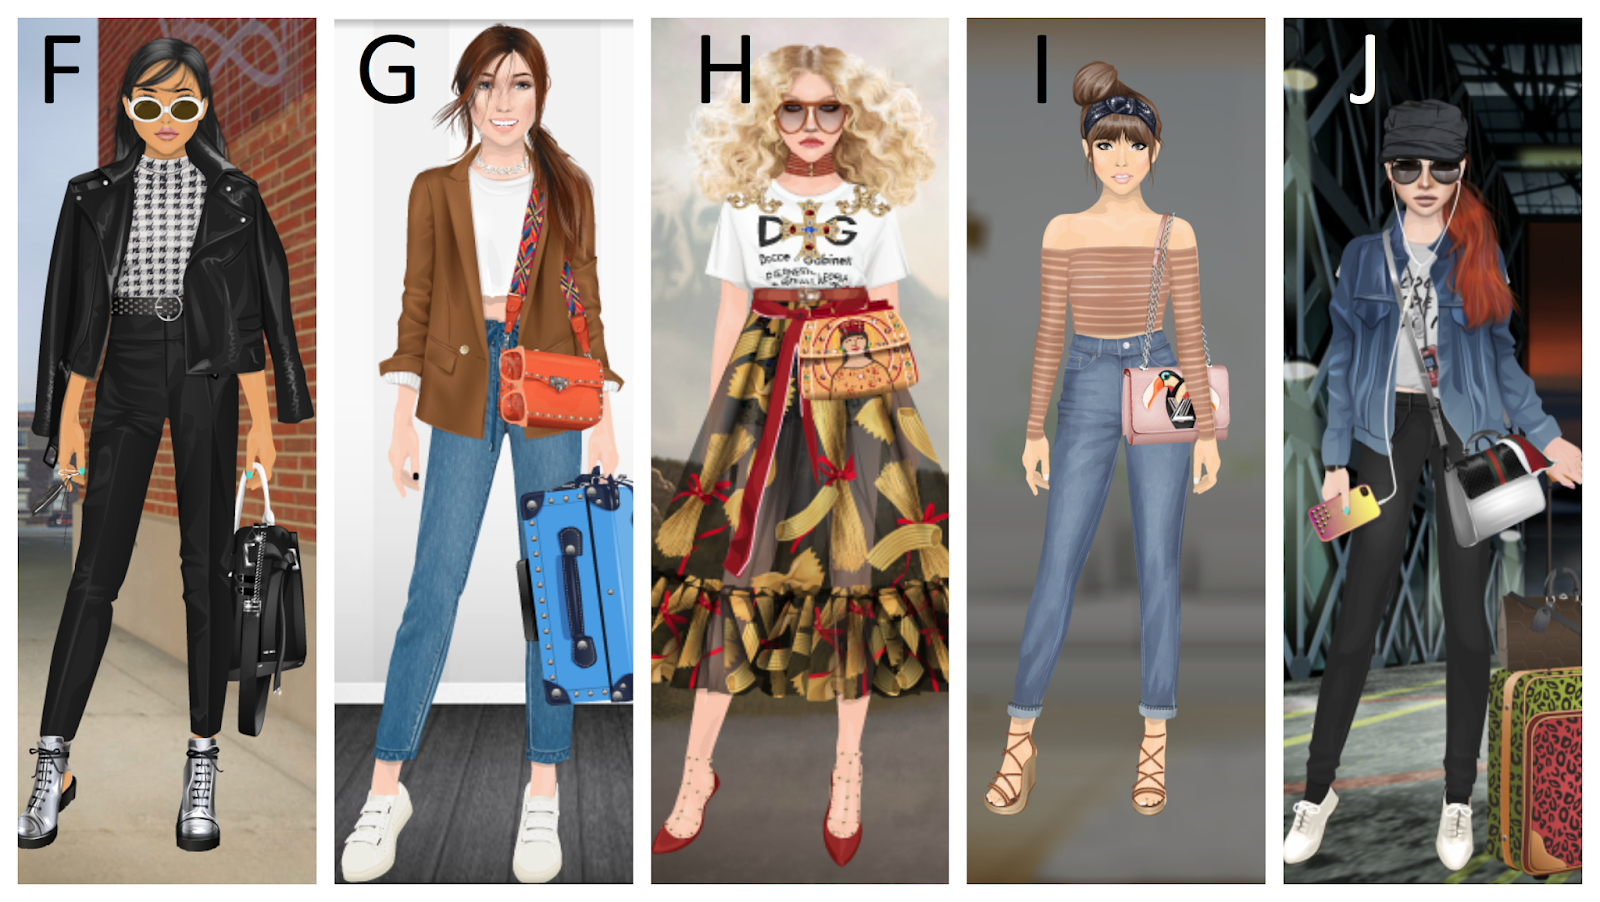 Weekend OOTD - Travel Time Voting | Stardoll's Most Wanted...